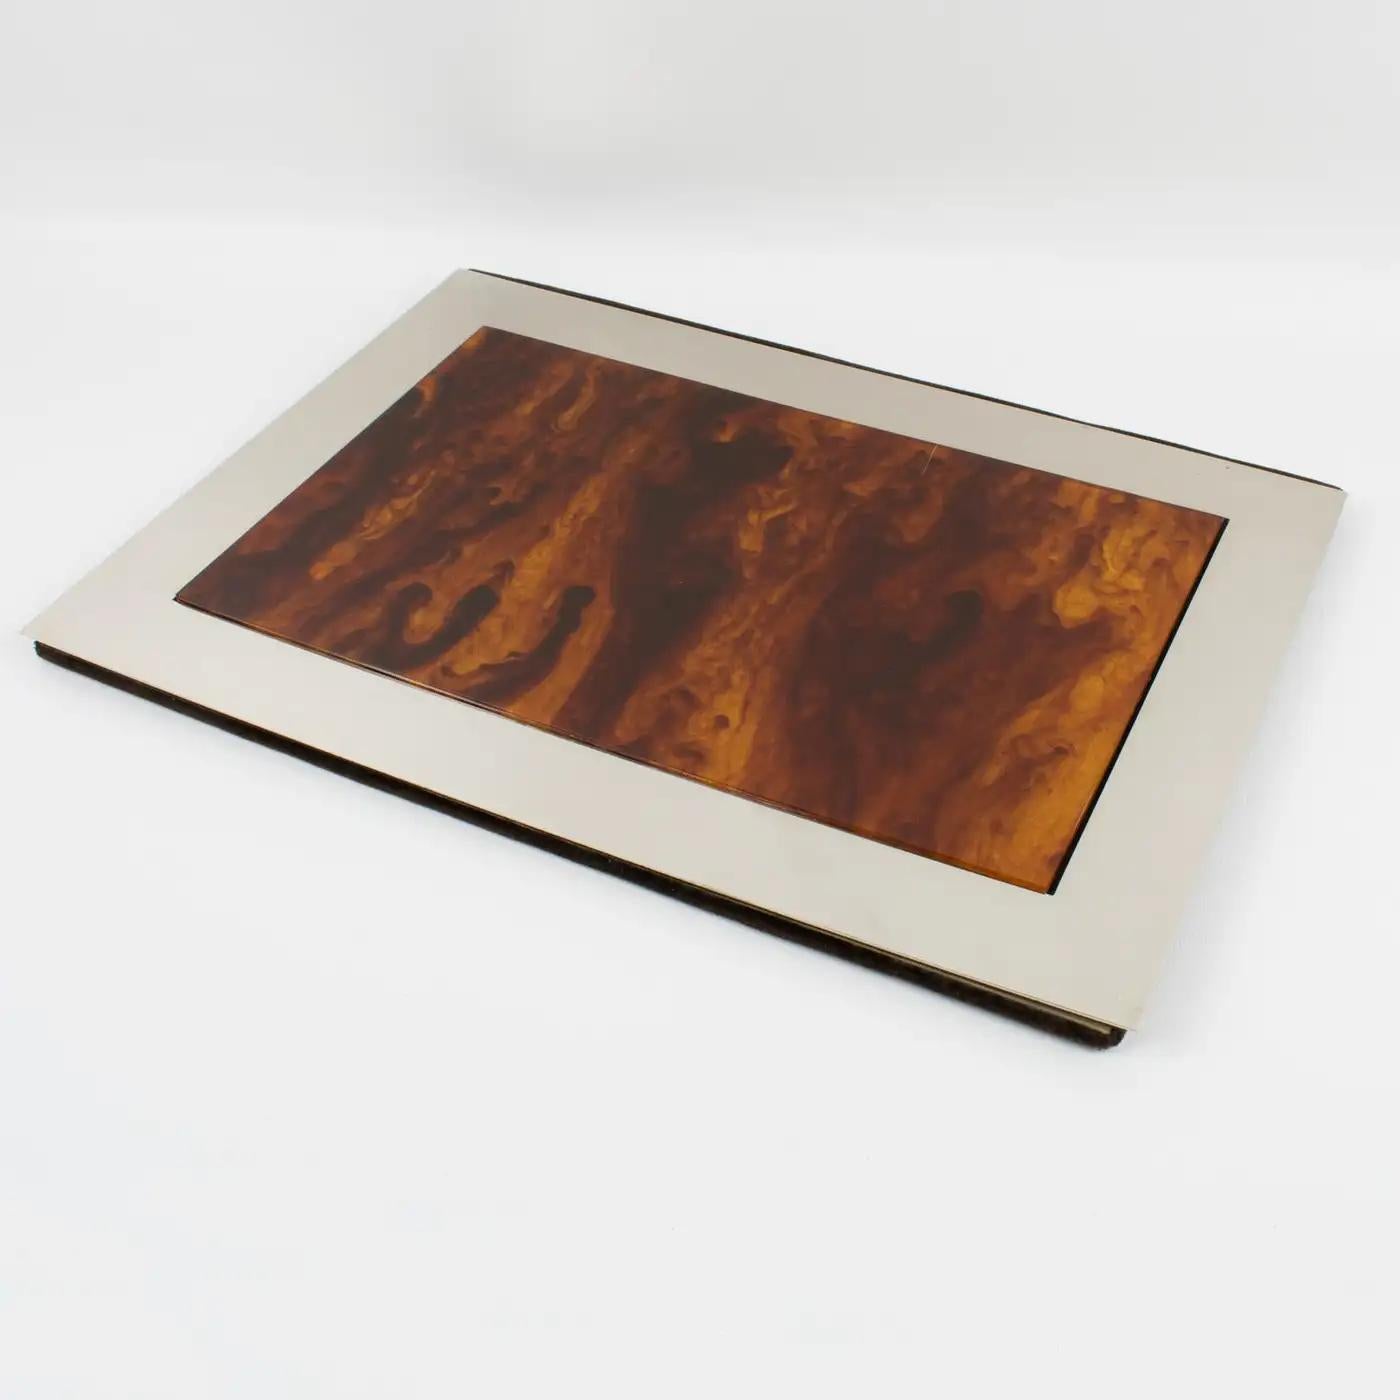 Modernist Chrome and Tortoiseshell Lucite Desk Pad, France 1970s In Excellent Condition For Sale In Atlanta, GA